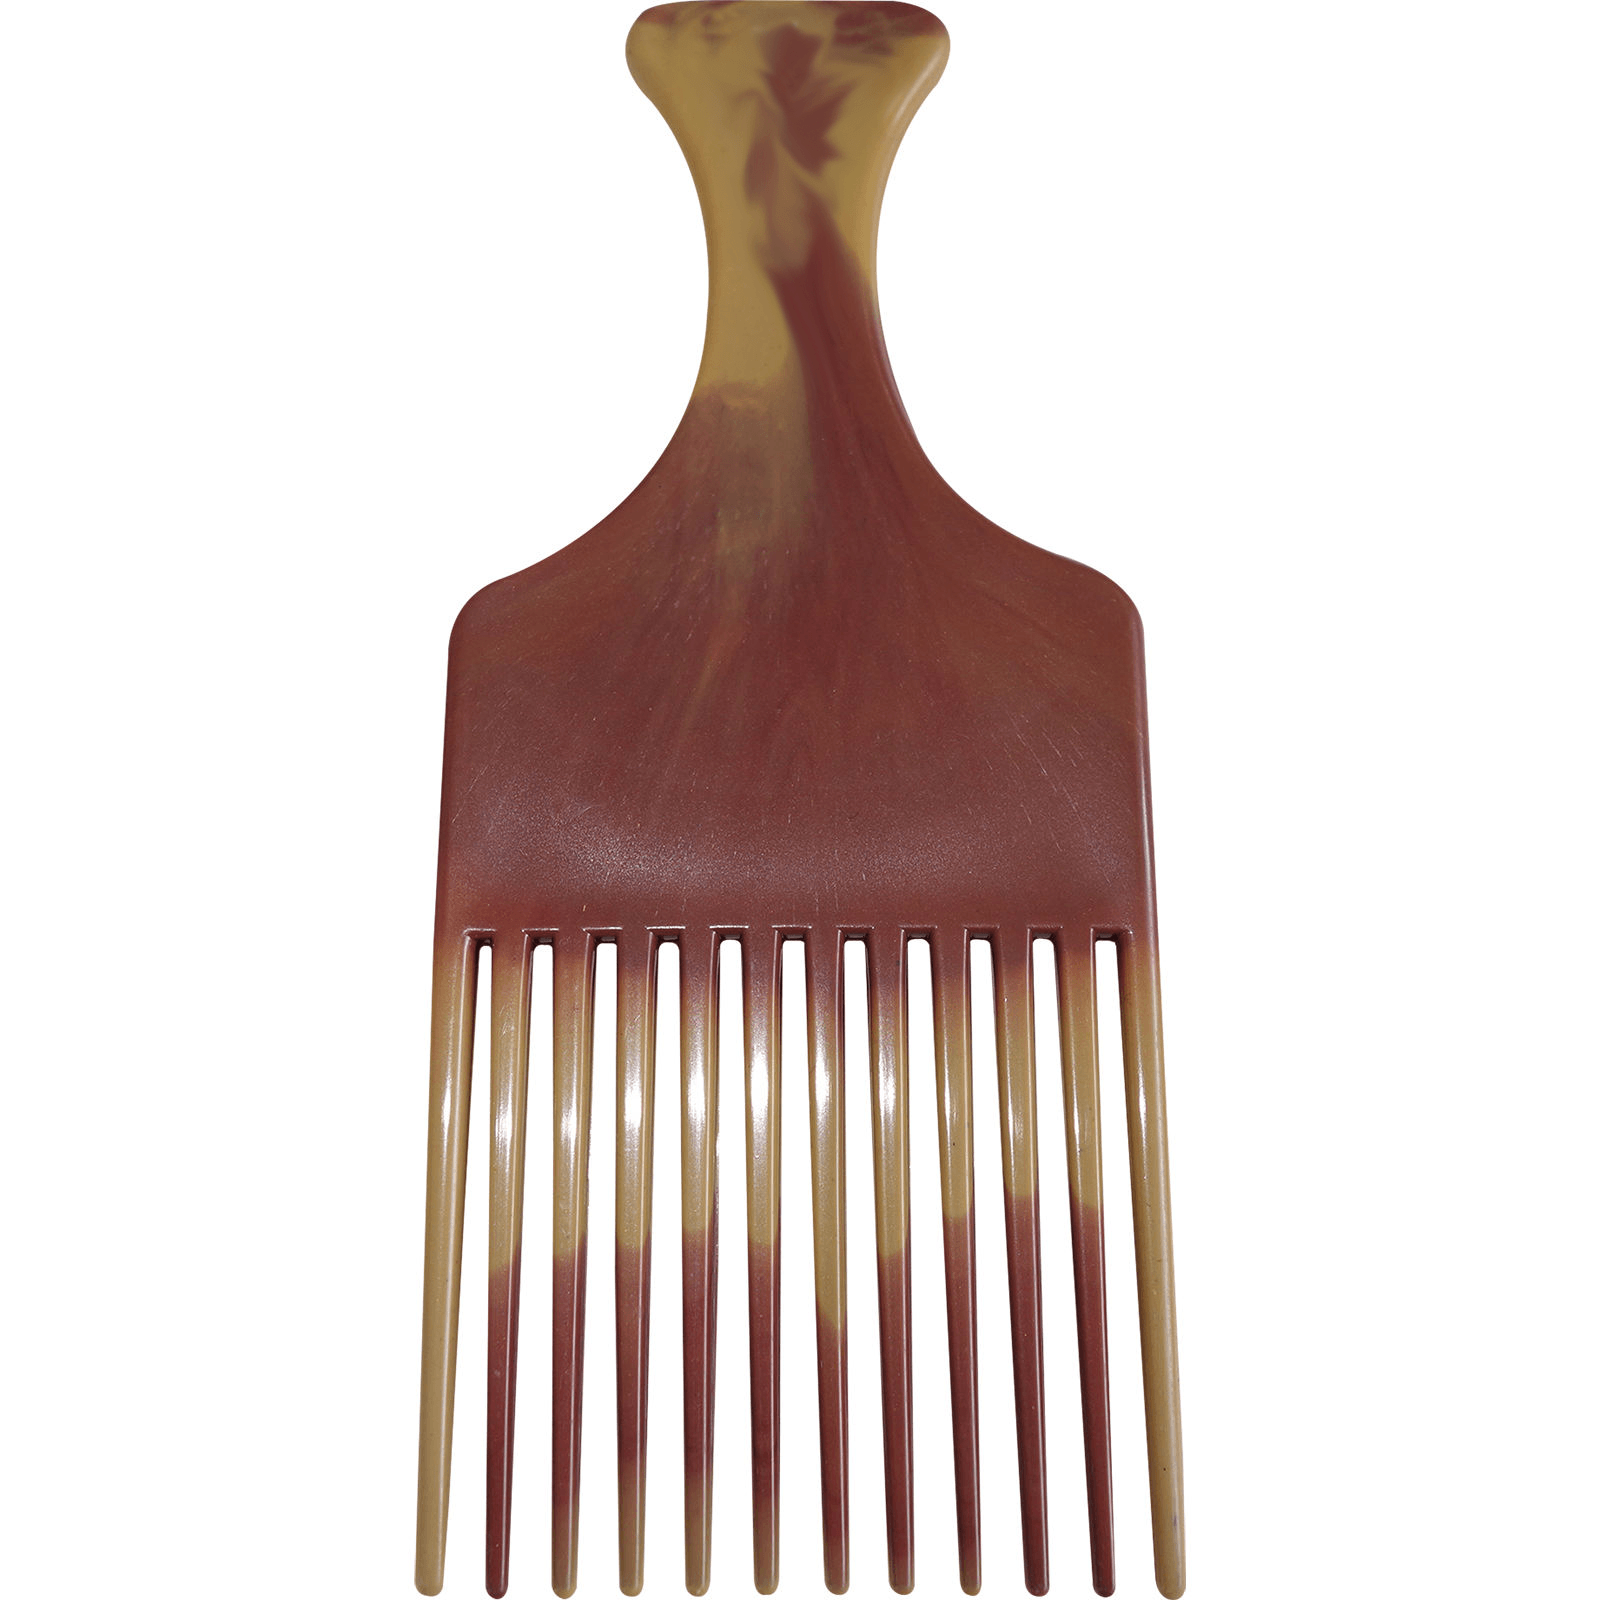 Afro Pick Natural Hair Style Comb African Hairdresser Salon Barber Accessories